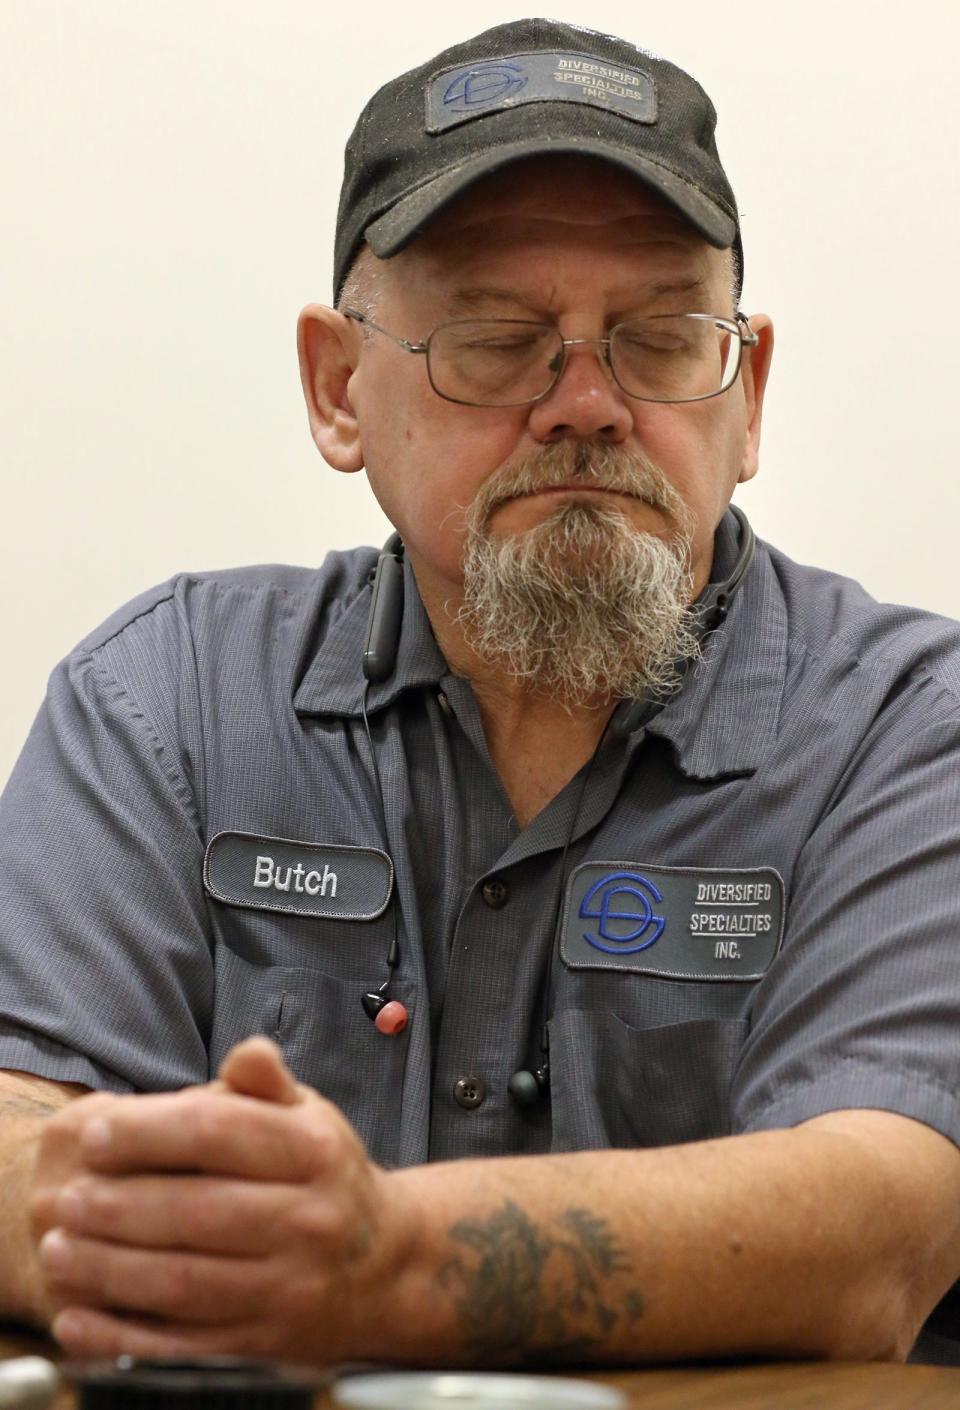 Arthur “Butch” Davis pauses as he speaks with Gazette reporter Kara Fohner in June 2022 at a manufacturing facility in Belmont where he works. Davis spent more than 40 years in prison for murder, and now wants to help others avoid the same path he took as a 19-year-old.